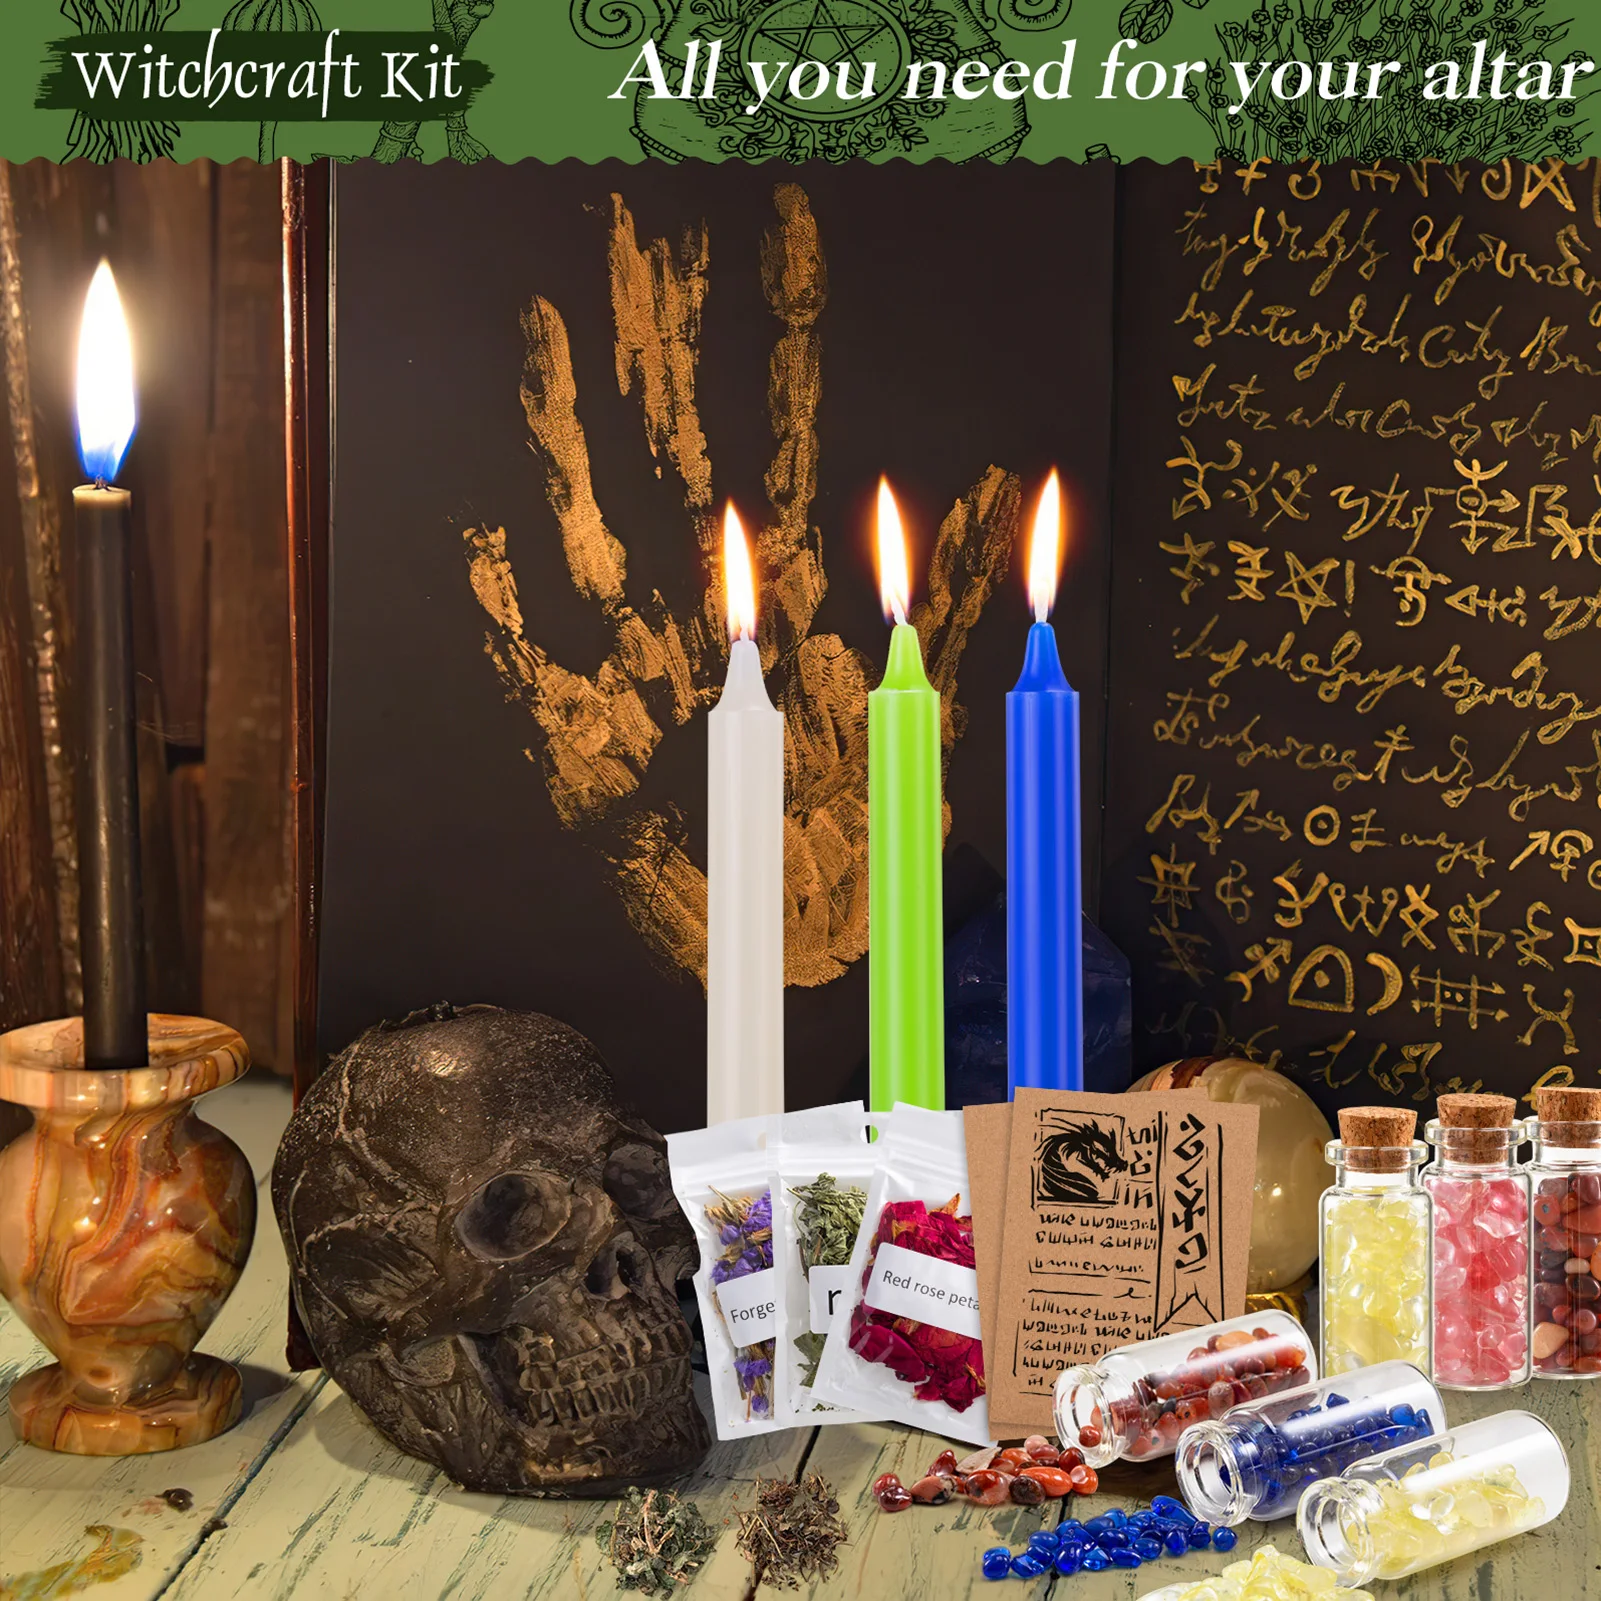 Wiccan Altar Supplies Witchcraft Kit For Wiccan Supplies And Tools Altar Kit Include Dried Herb Crystal Candle Kraft Paper For